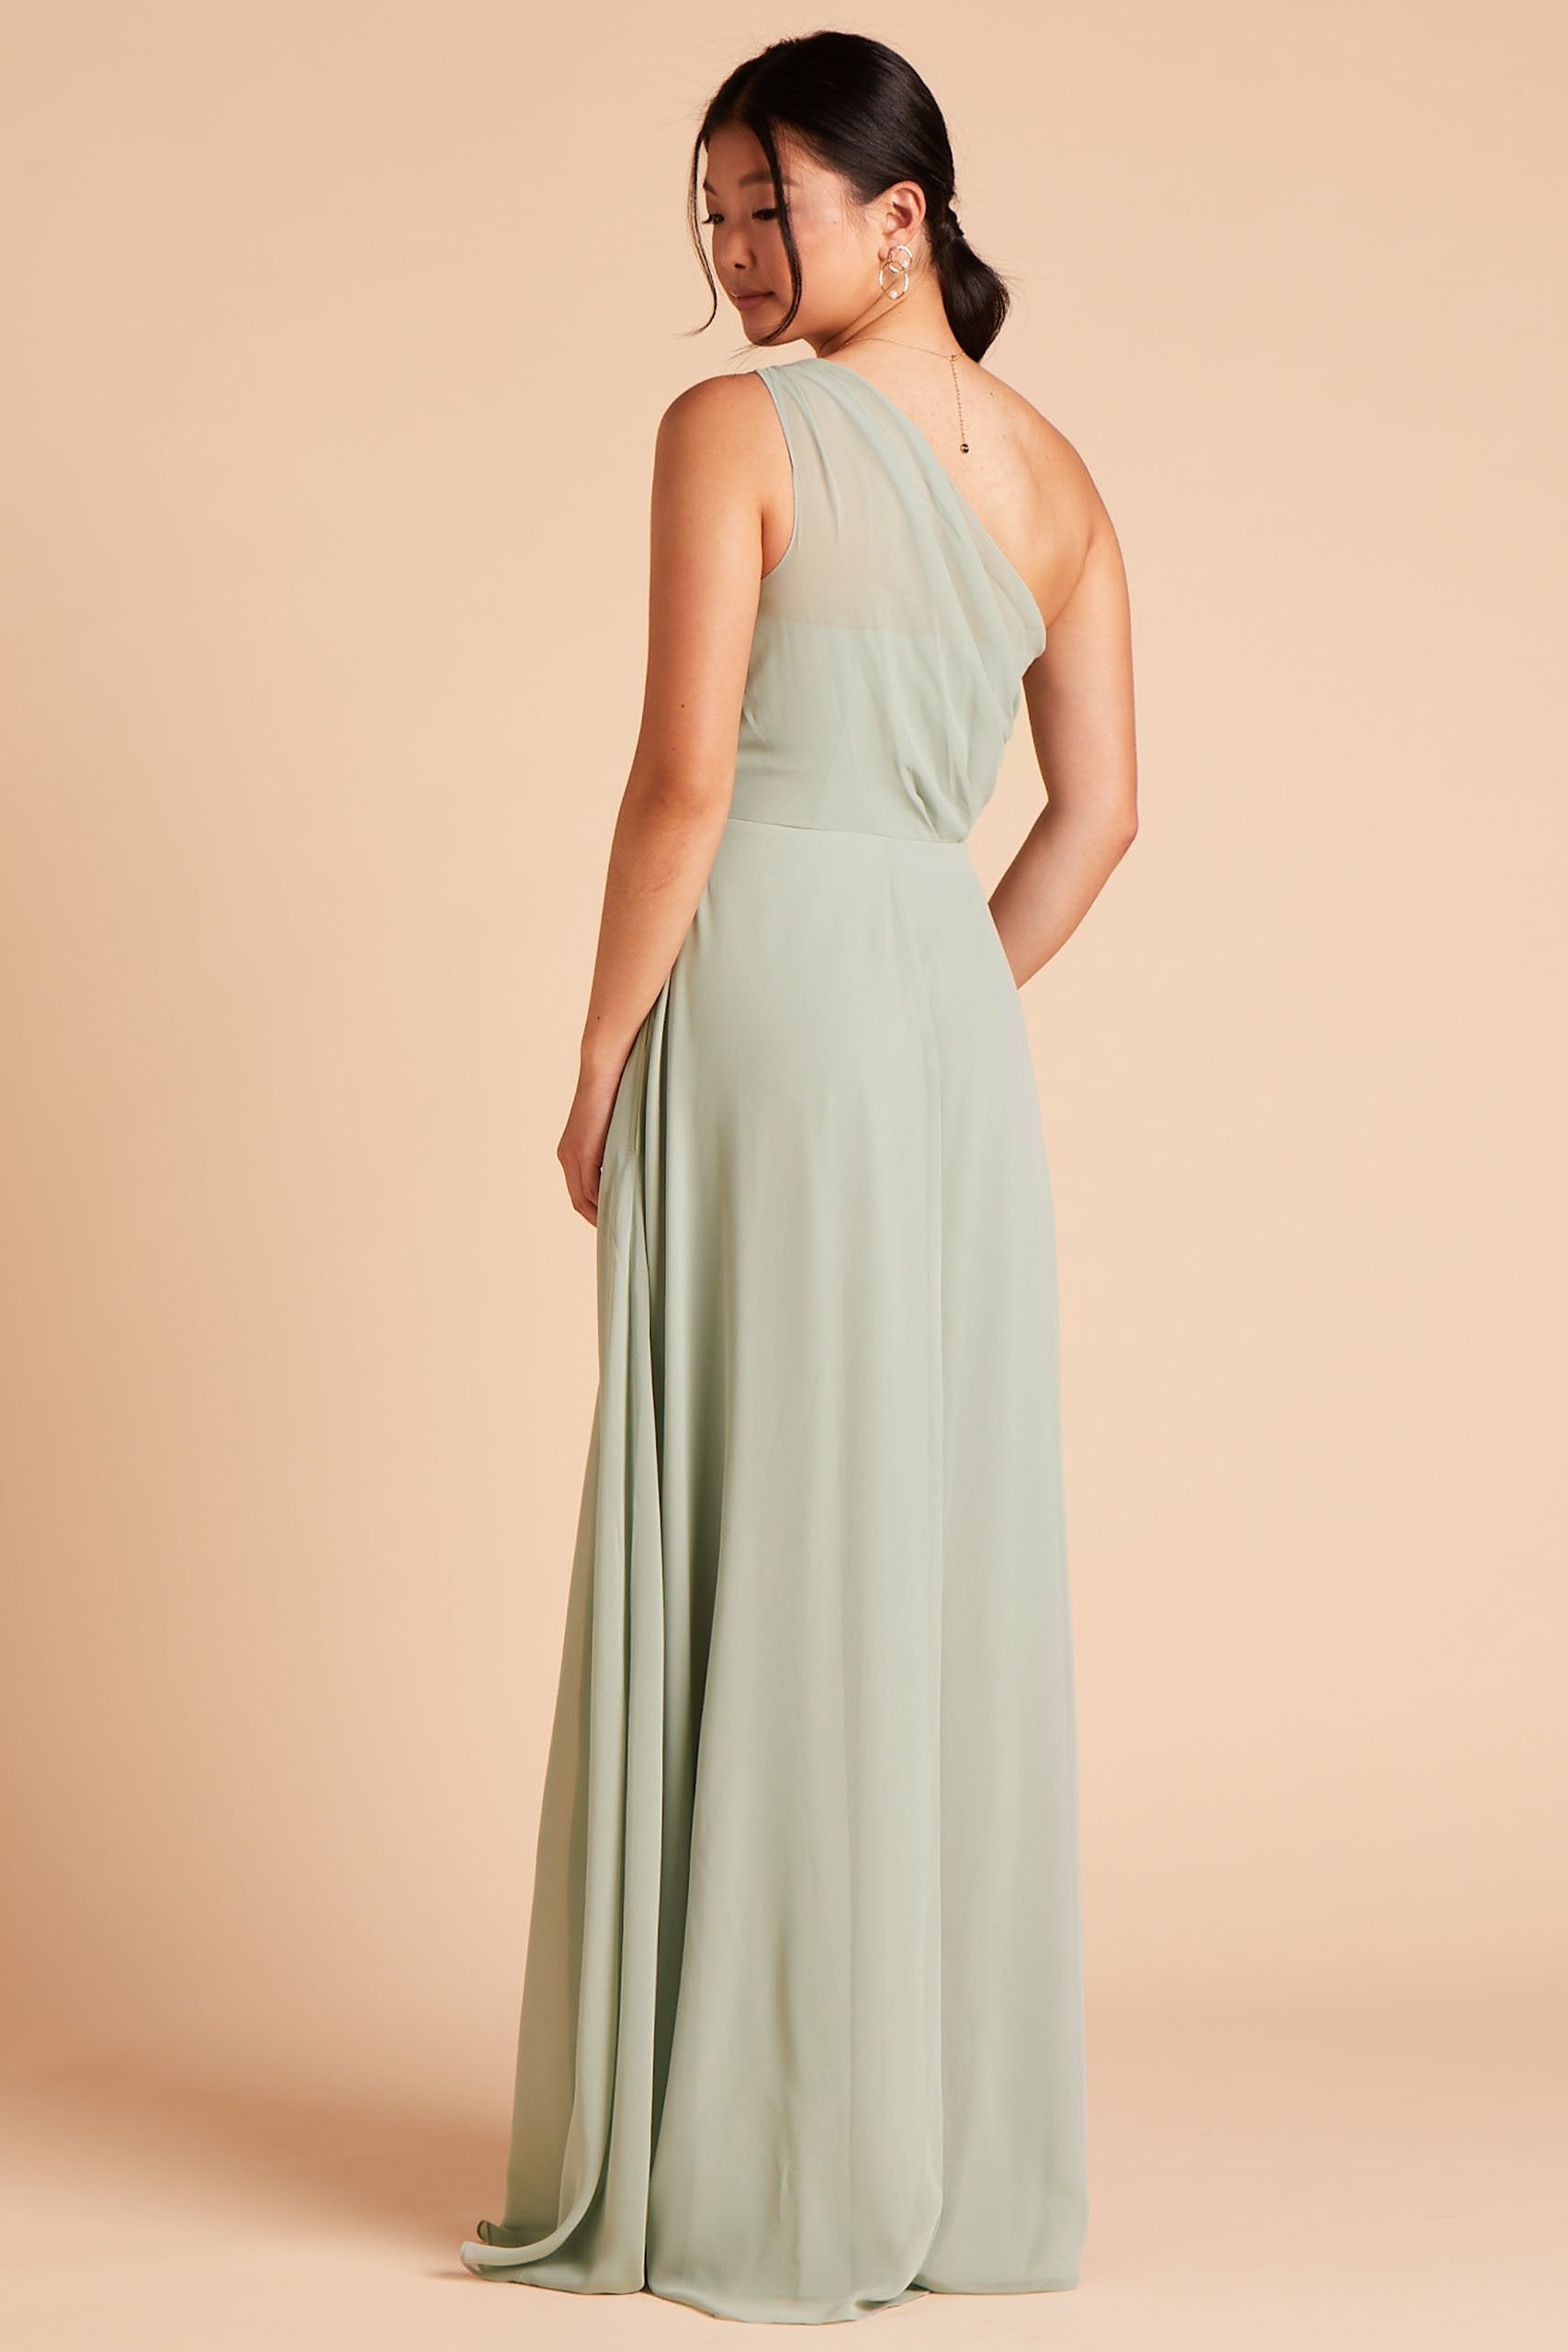 Back view of the floor-length Kira Dress in sage chiffon shows a model wearing sheer, softly pleating chiffon gathered at the bodice shoulder and draping across the back to the side seam.